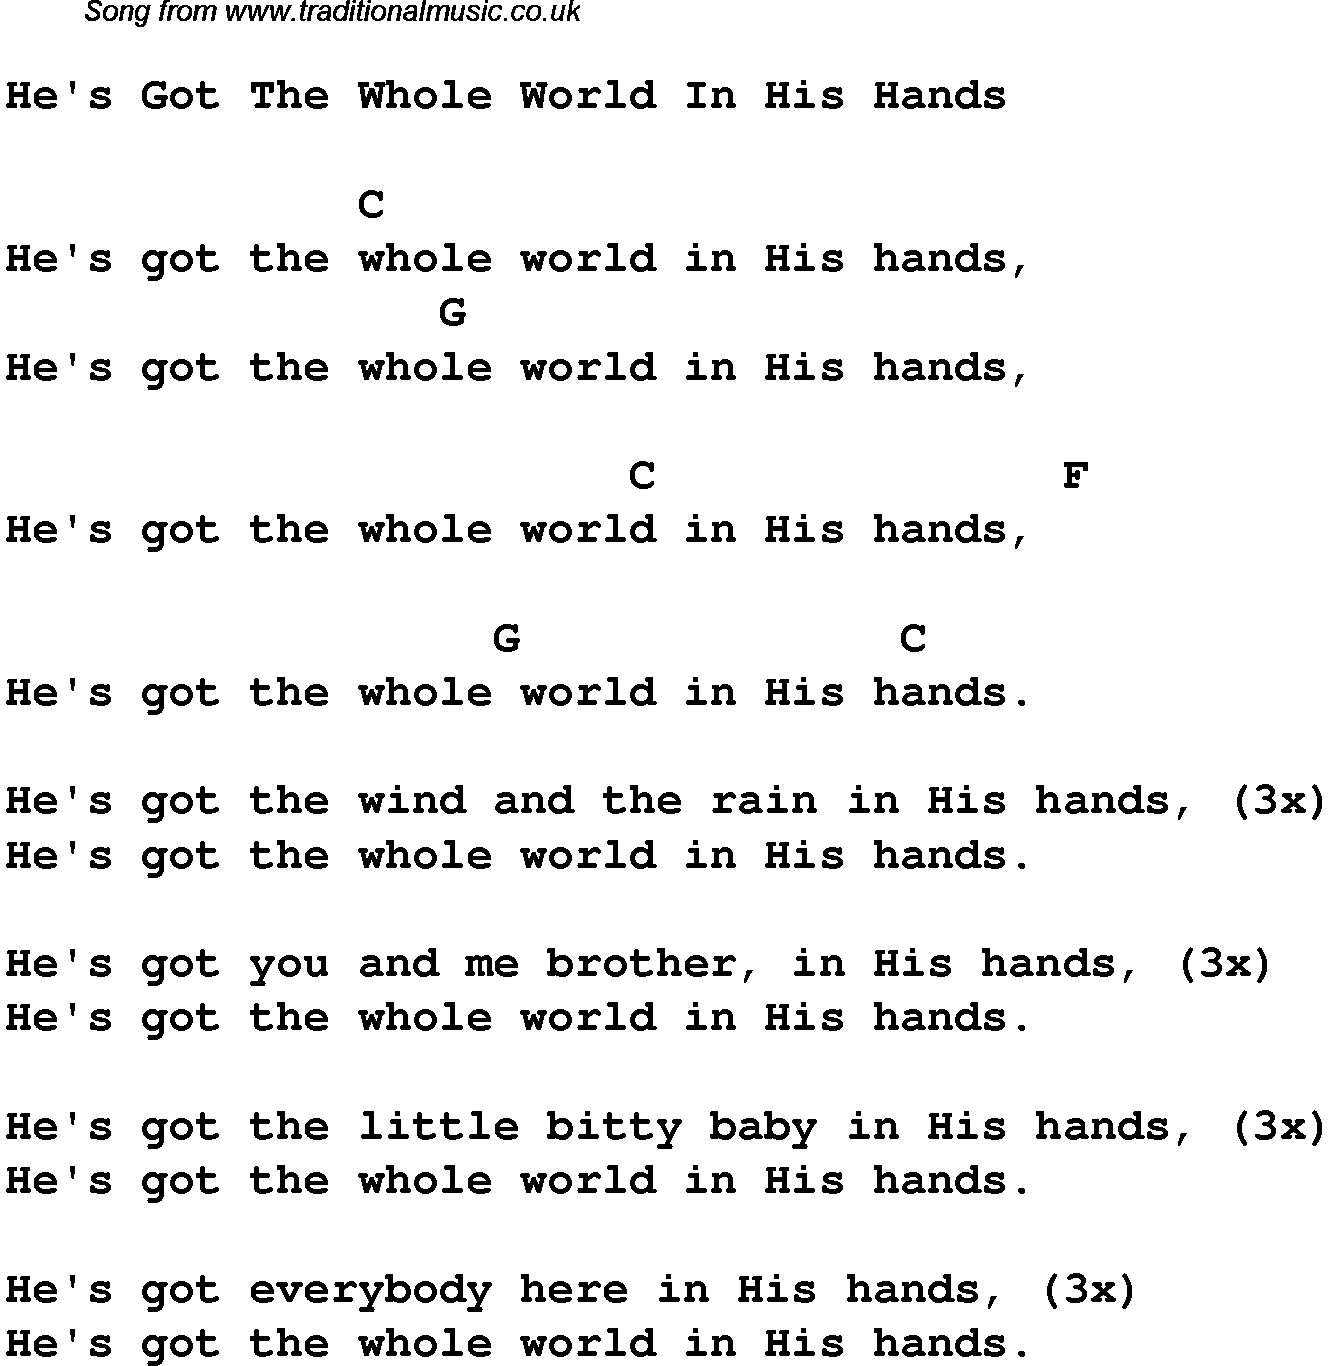 Gospel Song: hes-got-the-whole-world-in-his-hands, lyrics and chords.